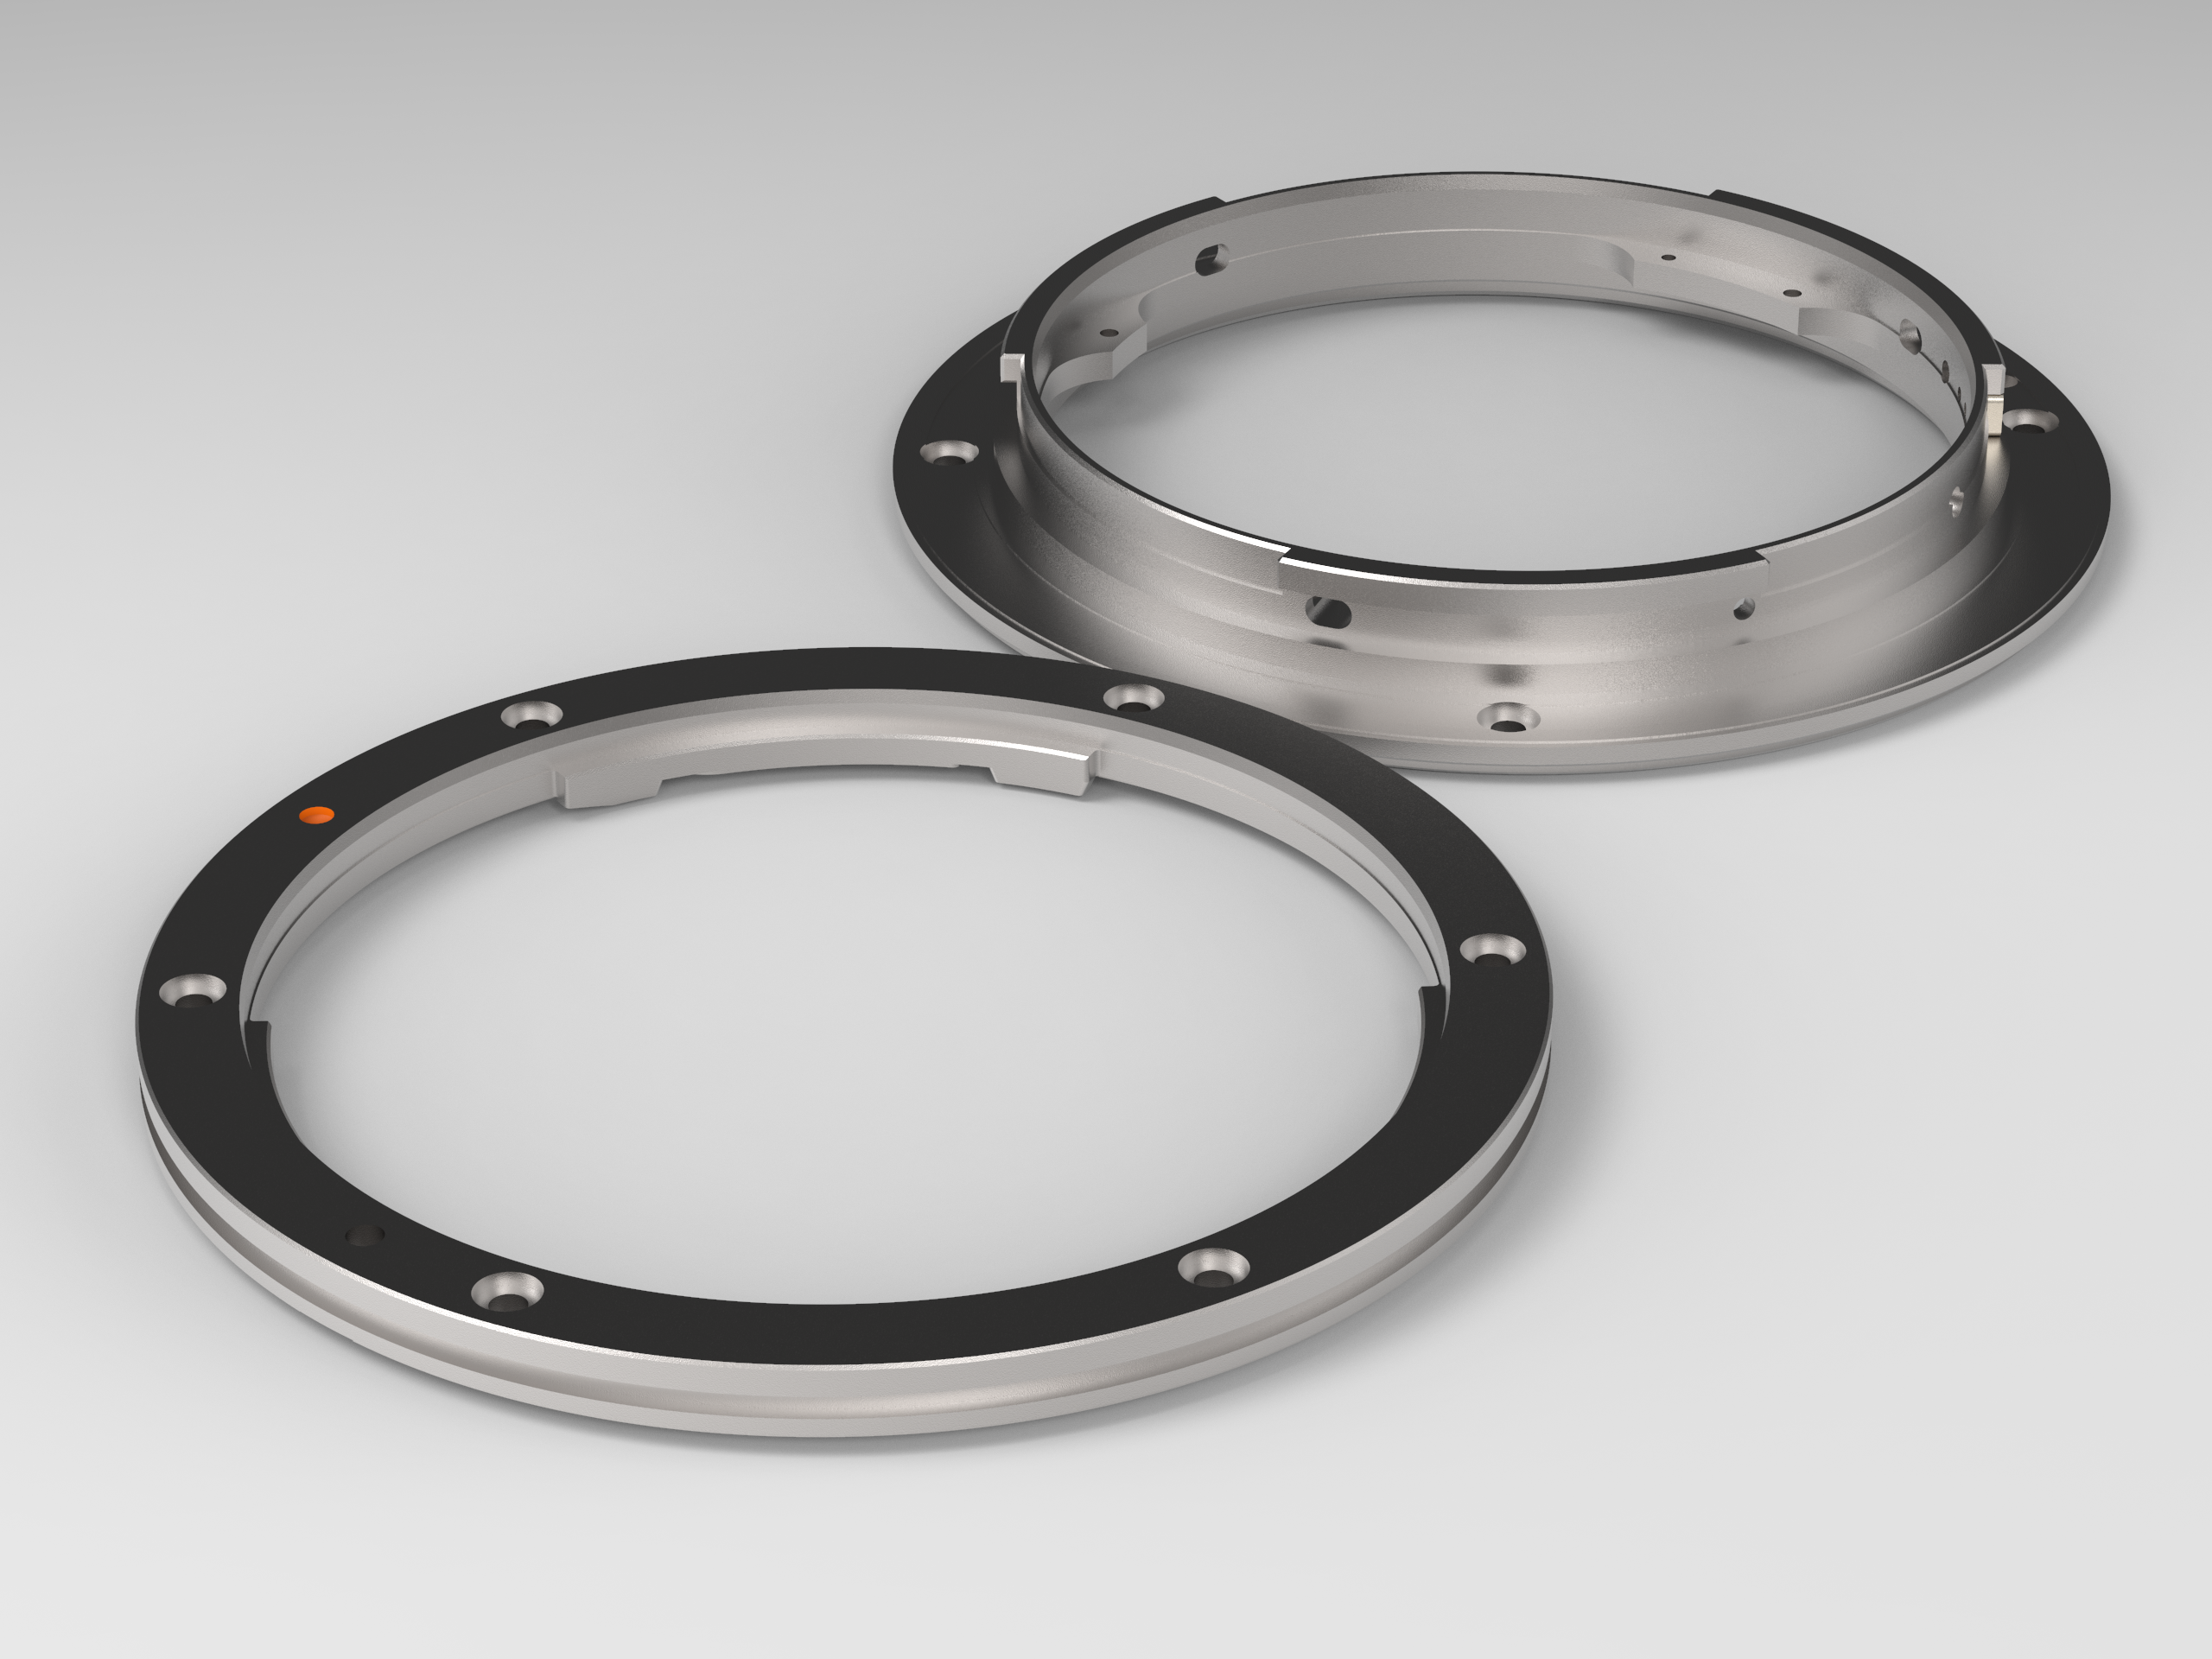 3D render of lens and body mount flanges